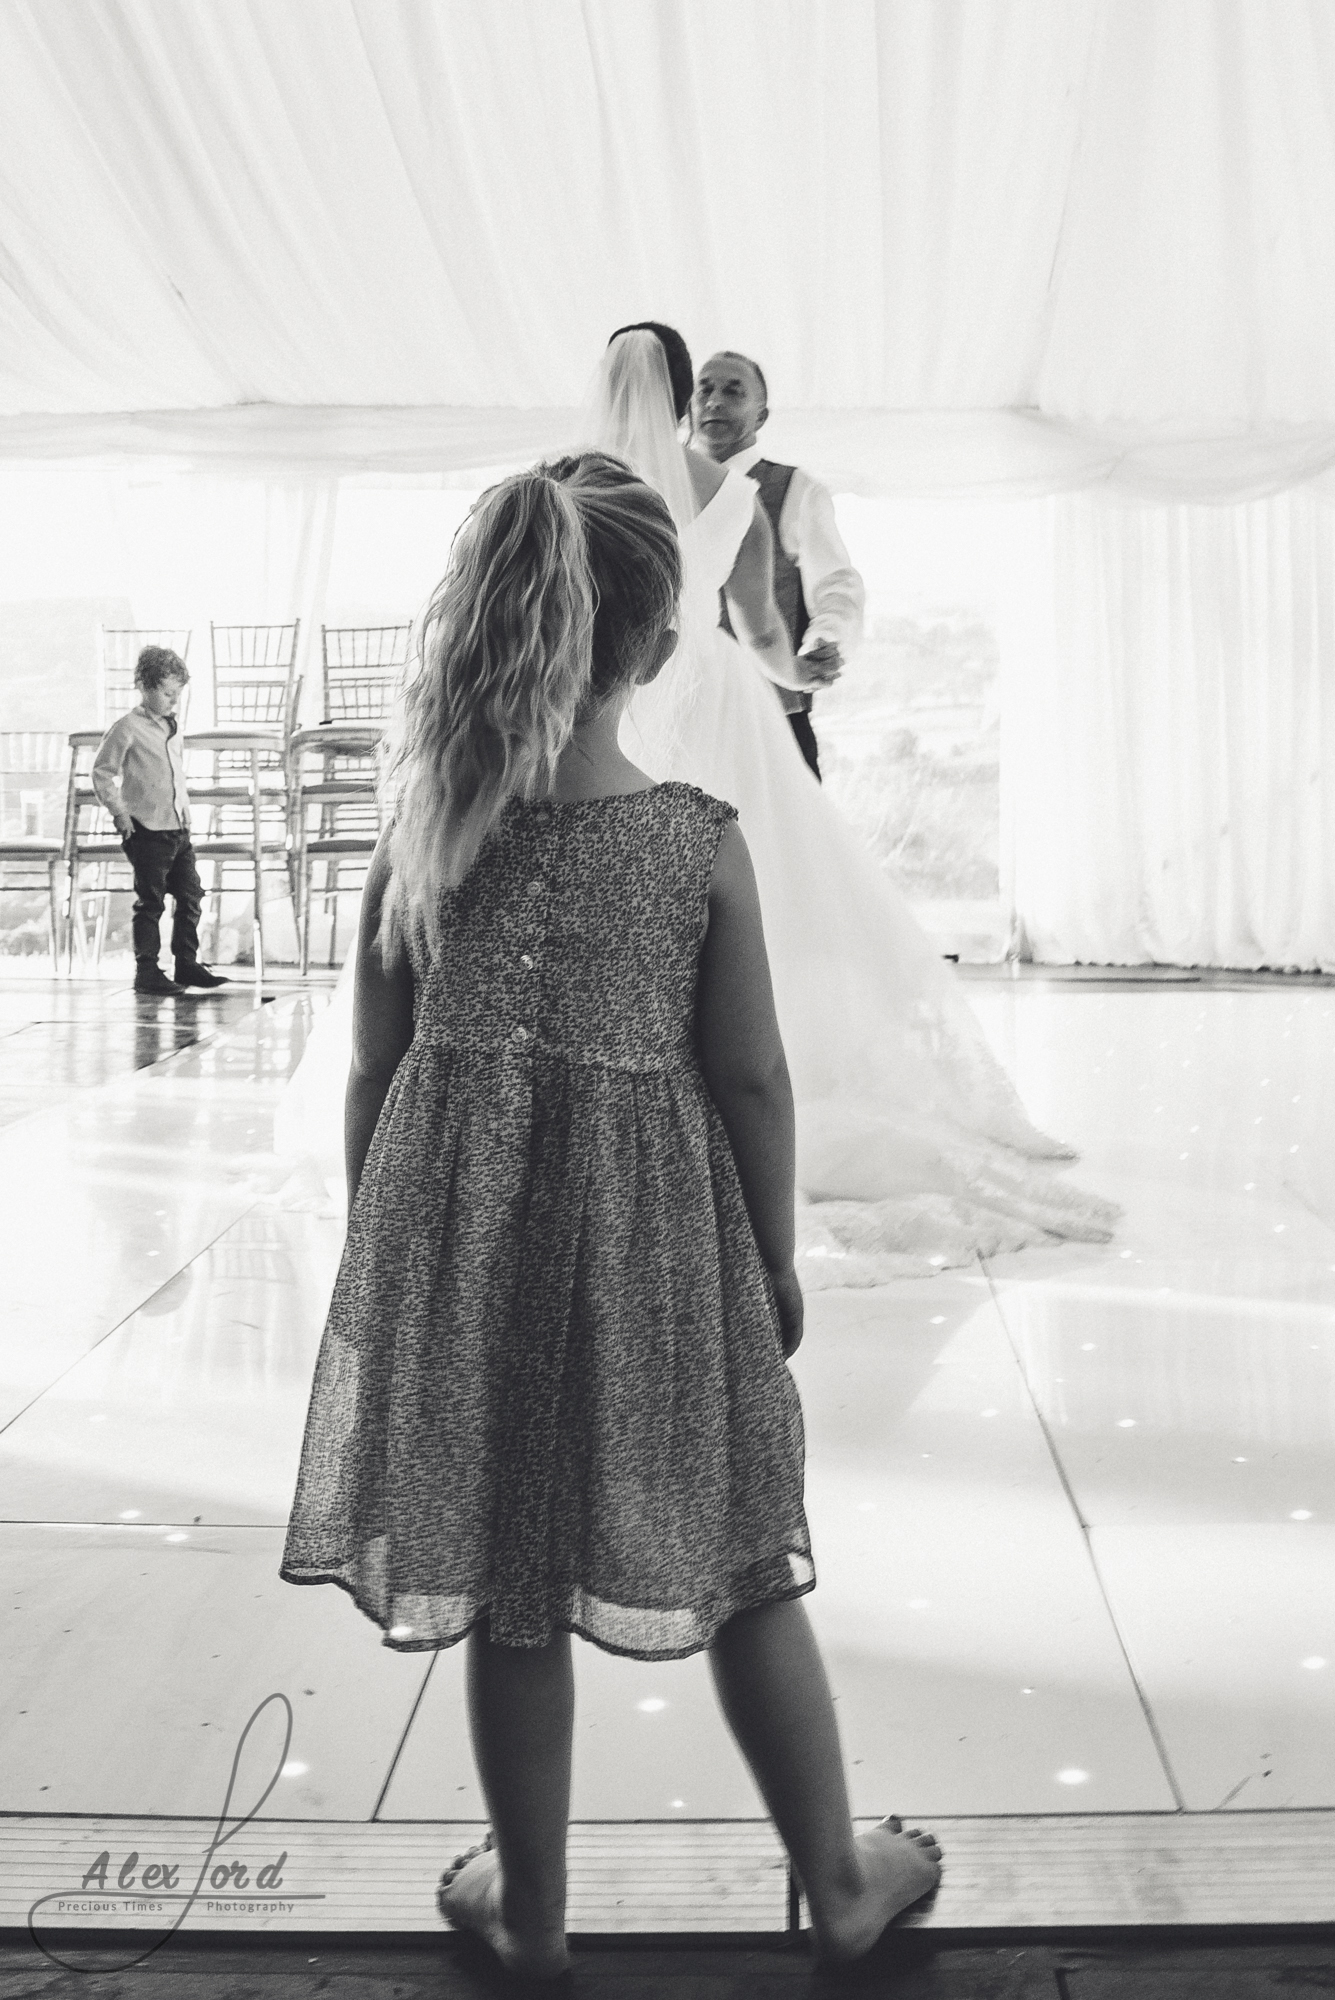 A young girl wedding guest stands at the edge of the dance floor watching the bride and groom take their first dance. 